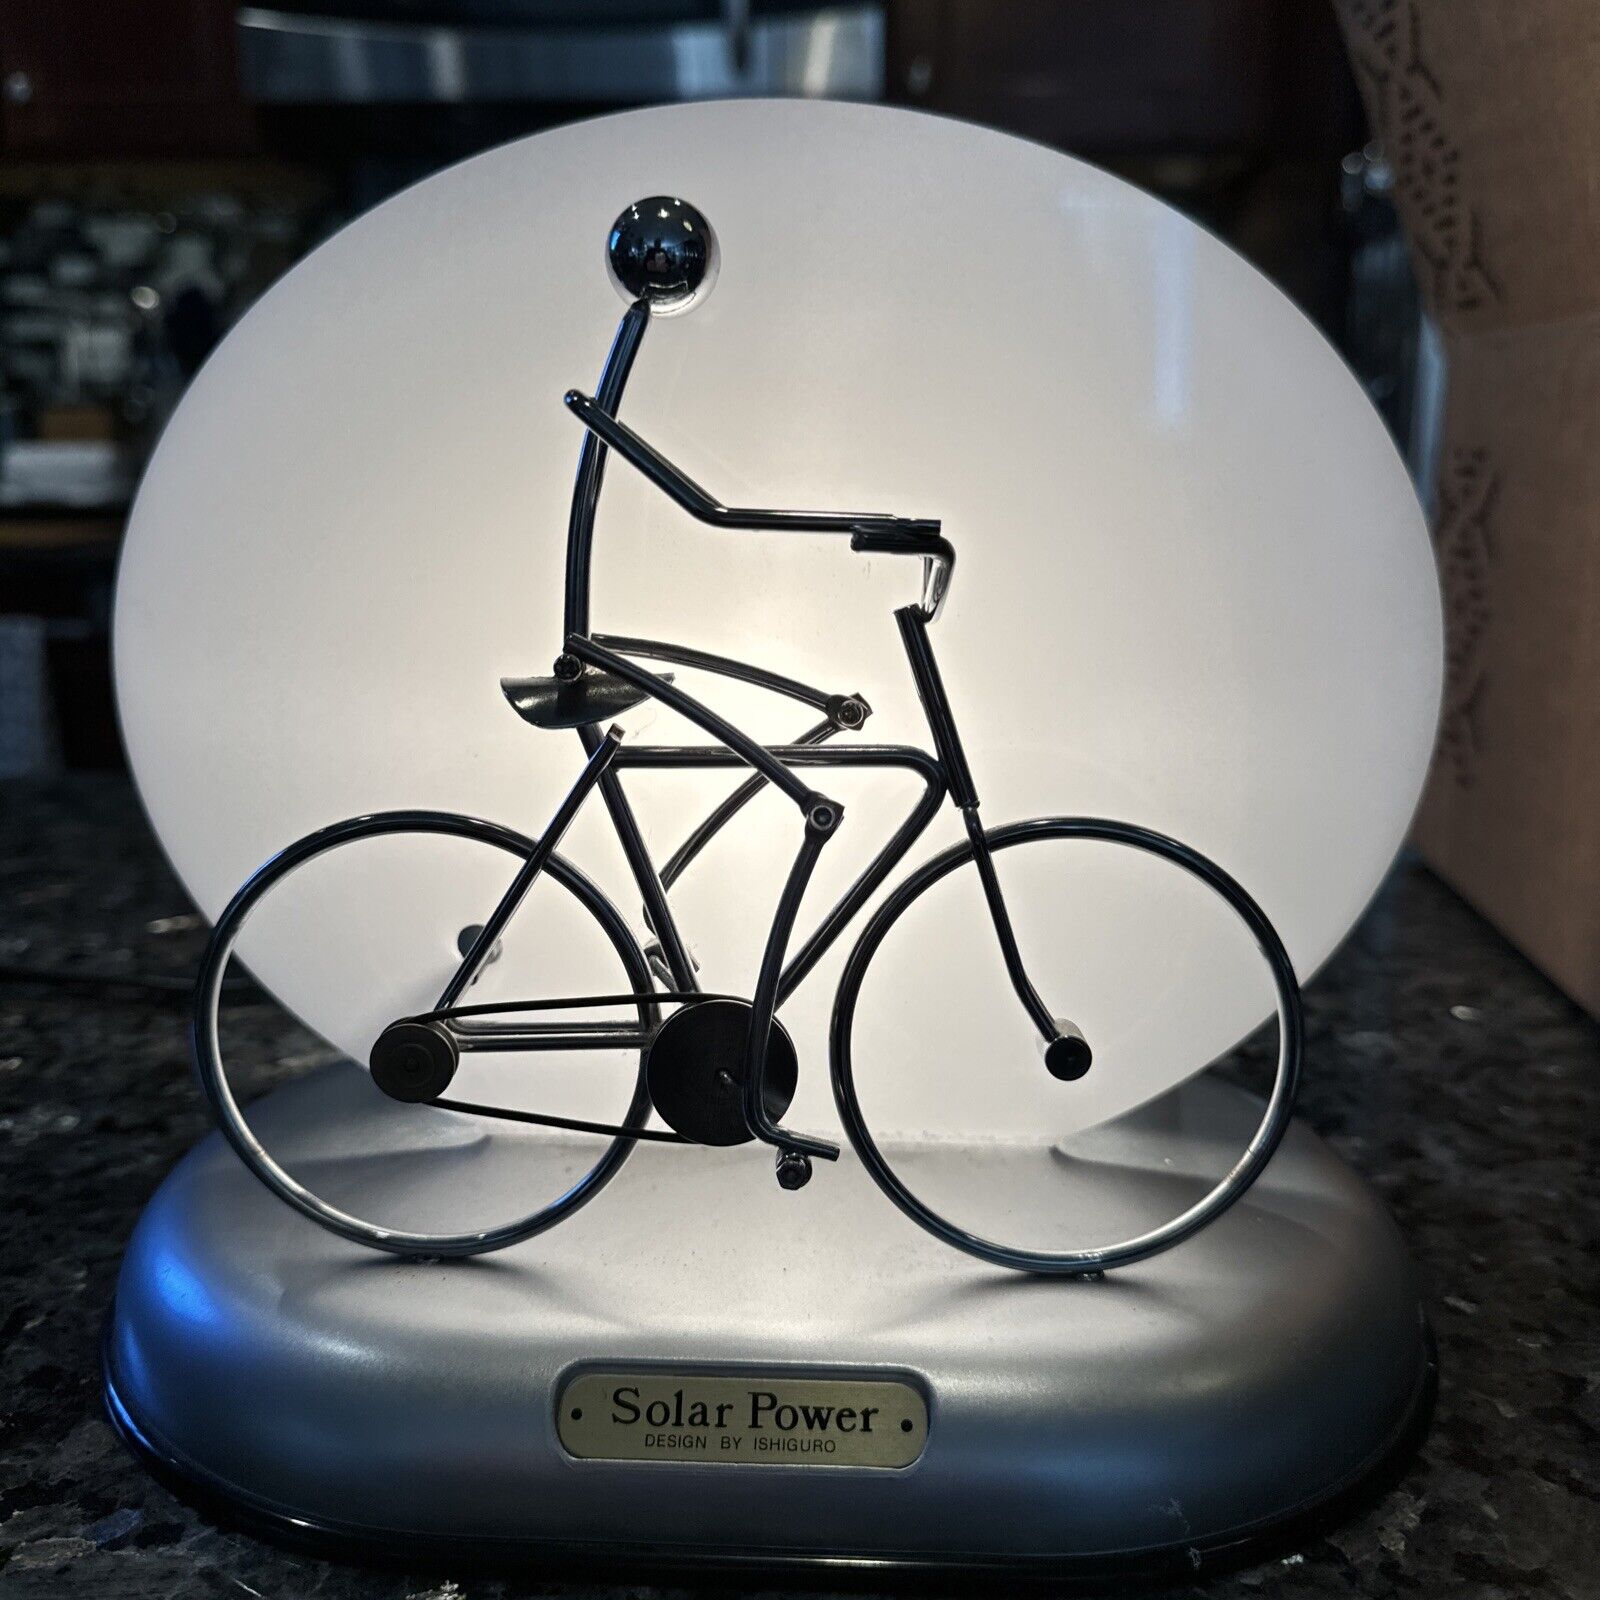 Bicycle Lamp Vintage Ishiguro Cyclist Biker Kinetic Sculpture With Solar Panel